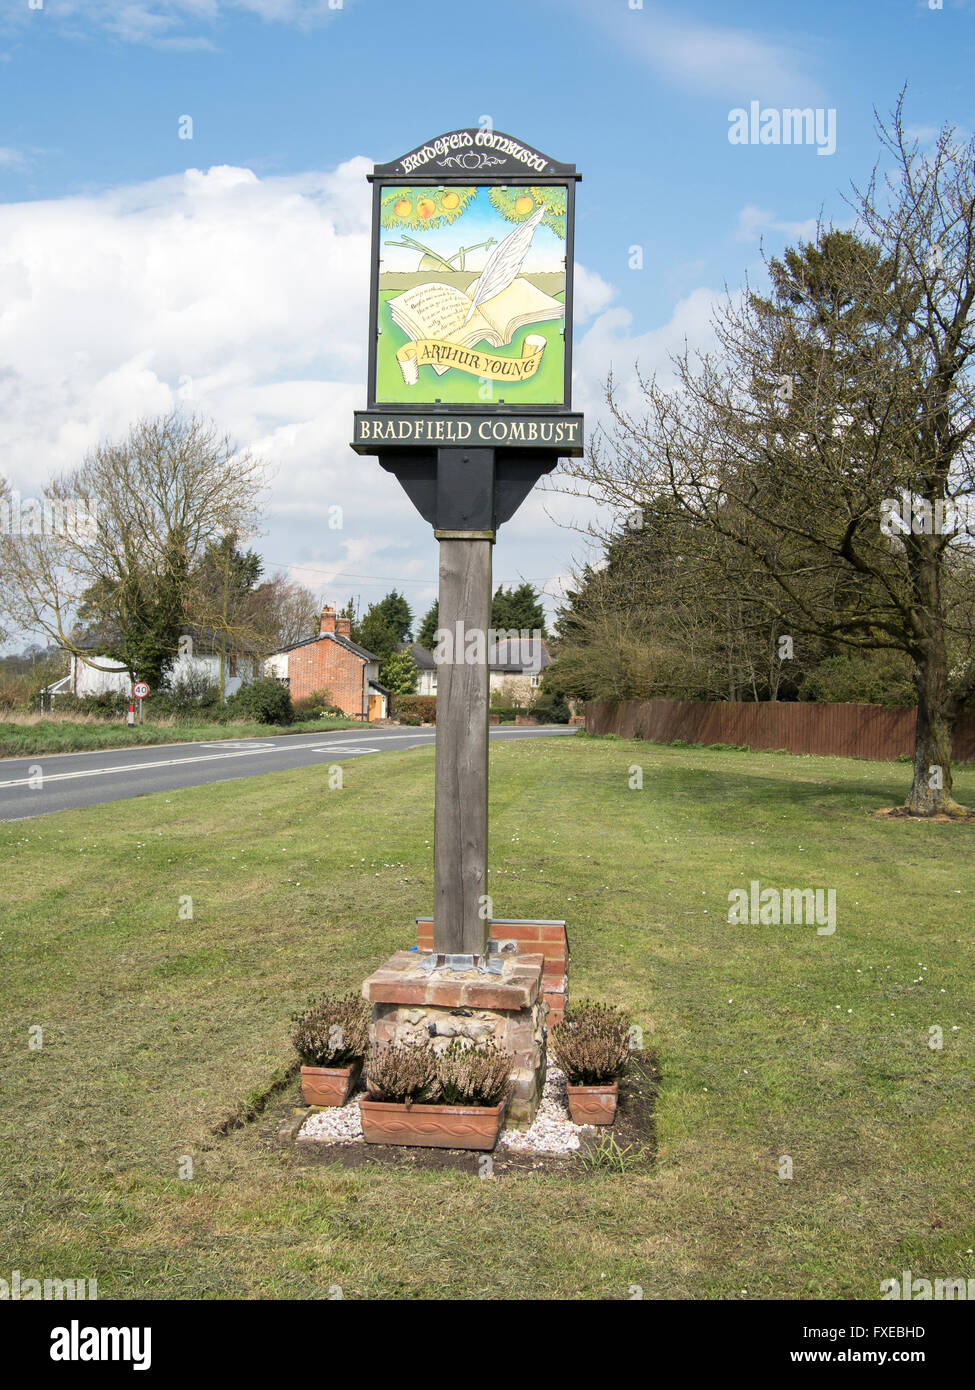 The village sign for Bradfield Combust in Suffolk, England. Stock Photo